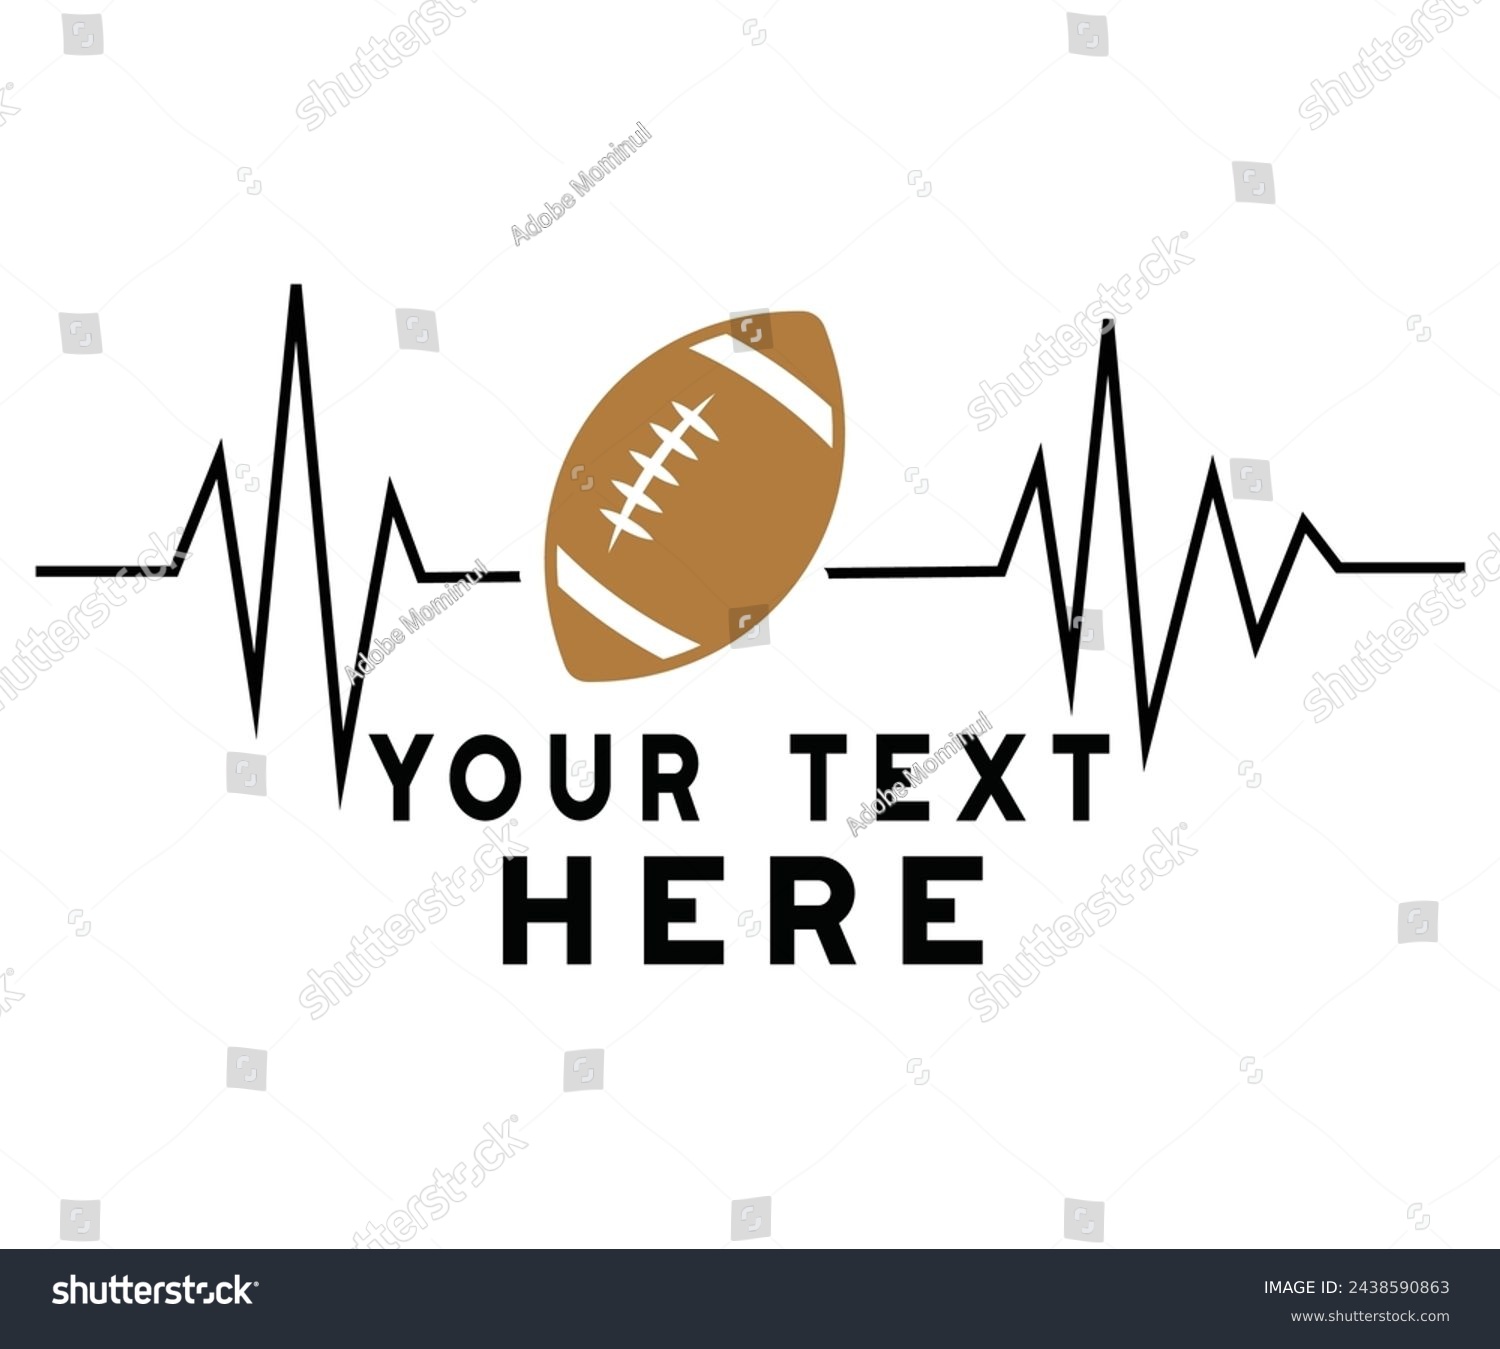 SVG of Your Text Here,Football Svg,Football Player Svg,Game Day Shirt,Football Quotes Svg,American Football Svg,Soccer Svg,Cut File,Commercial use svg